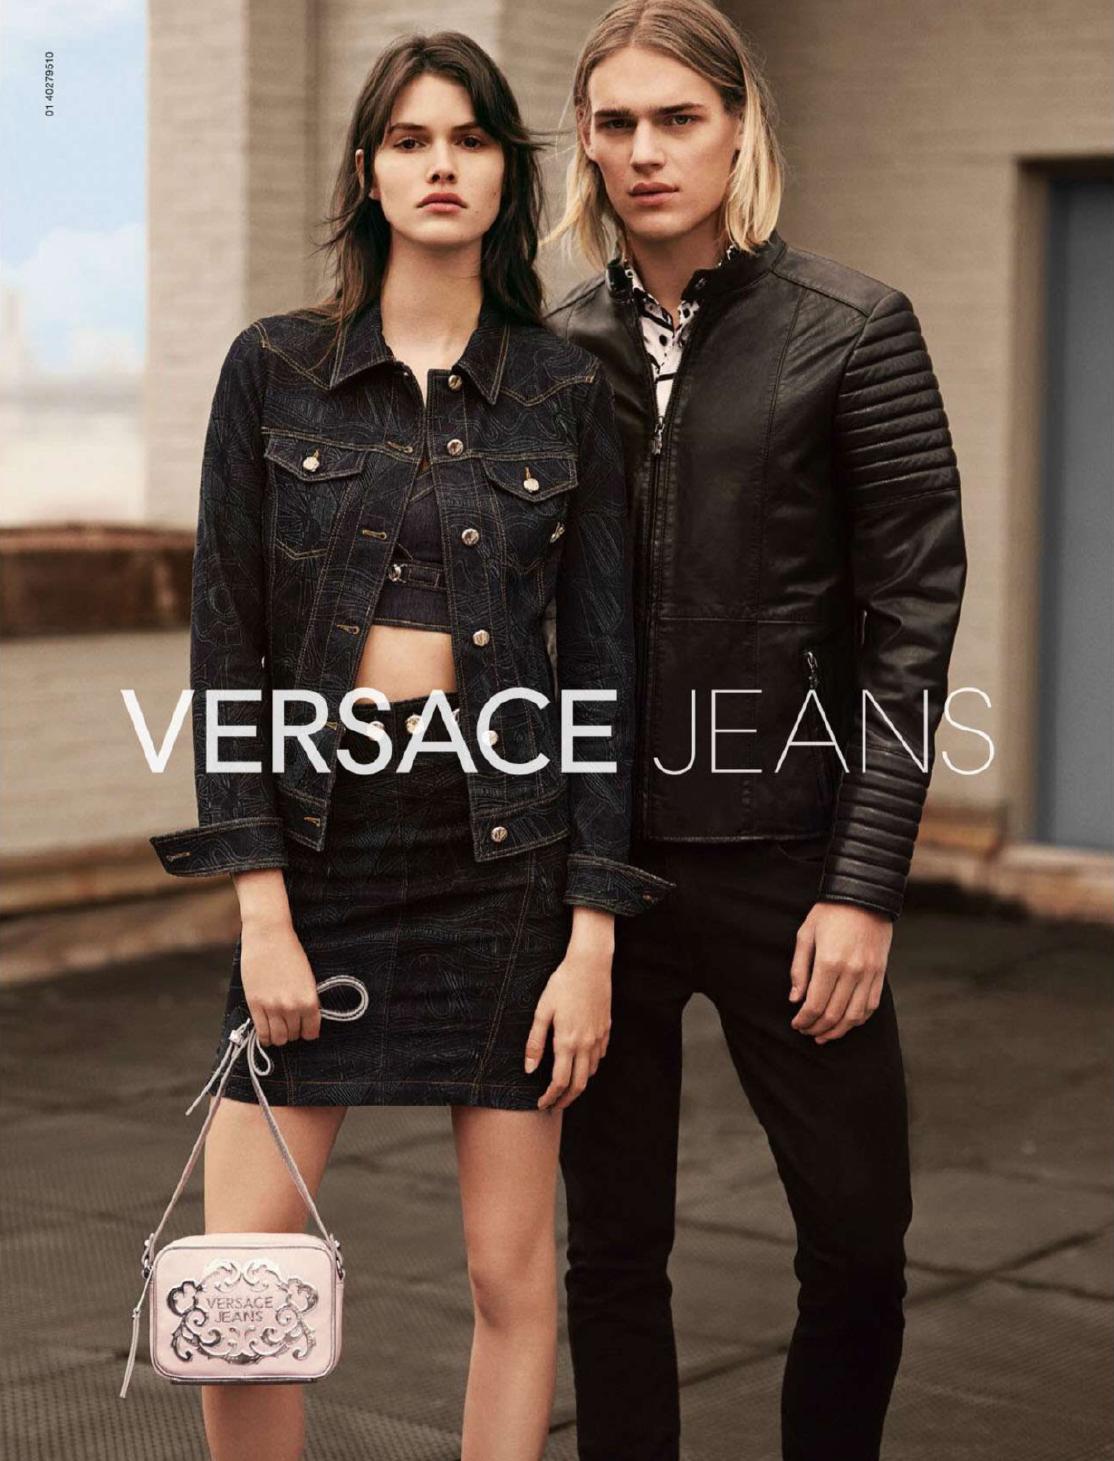 Ton Heukels Dons Leather & Denim for Versace Jeans Spring/Summer 2015 Campaign